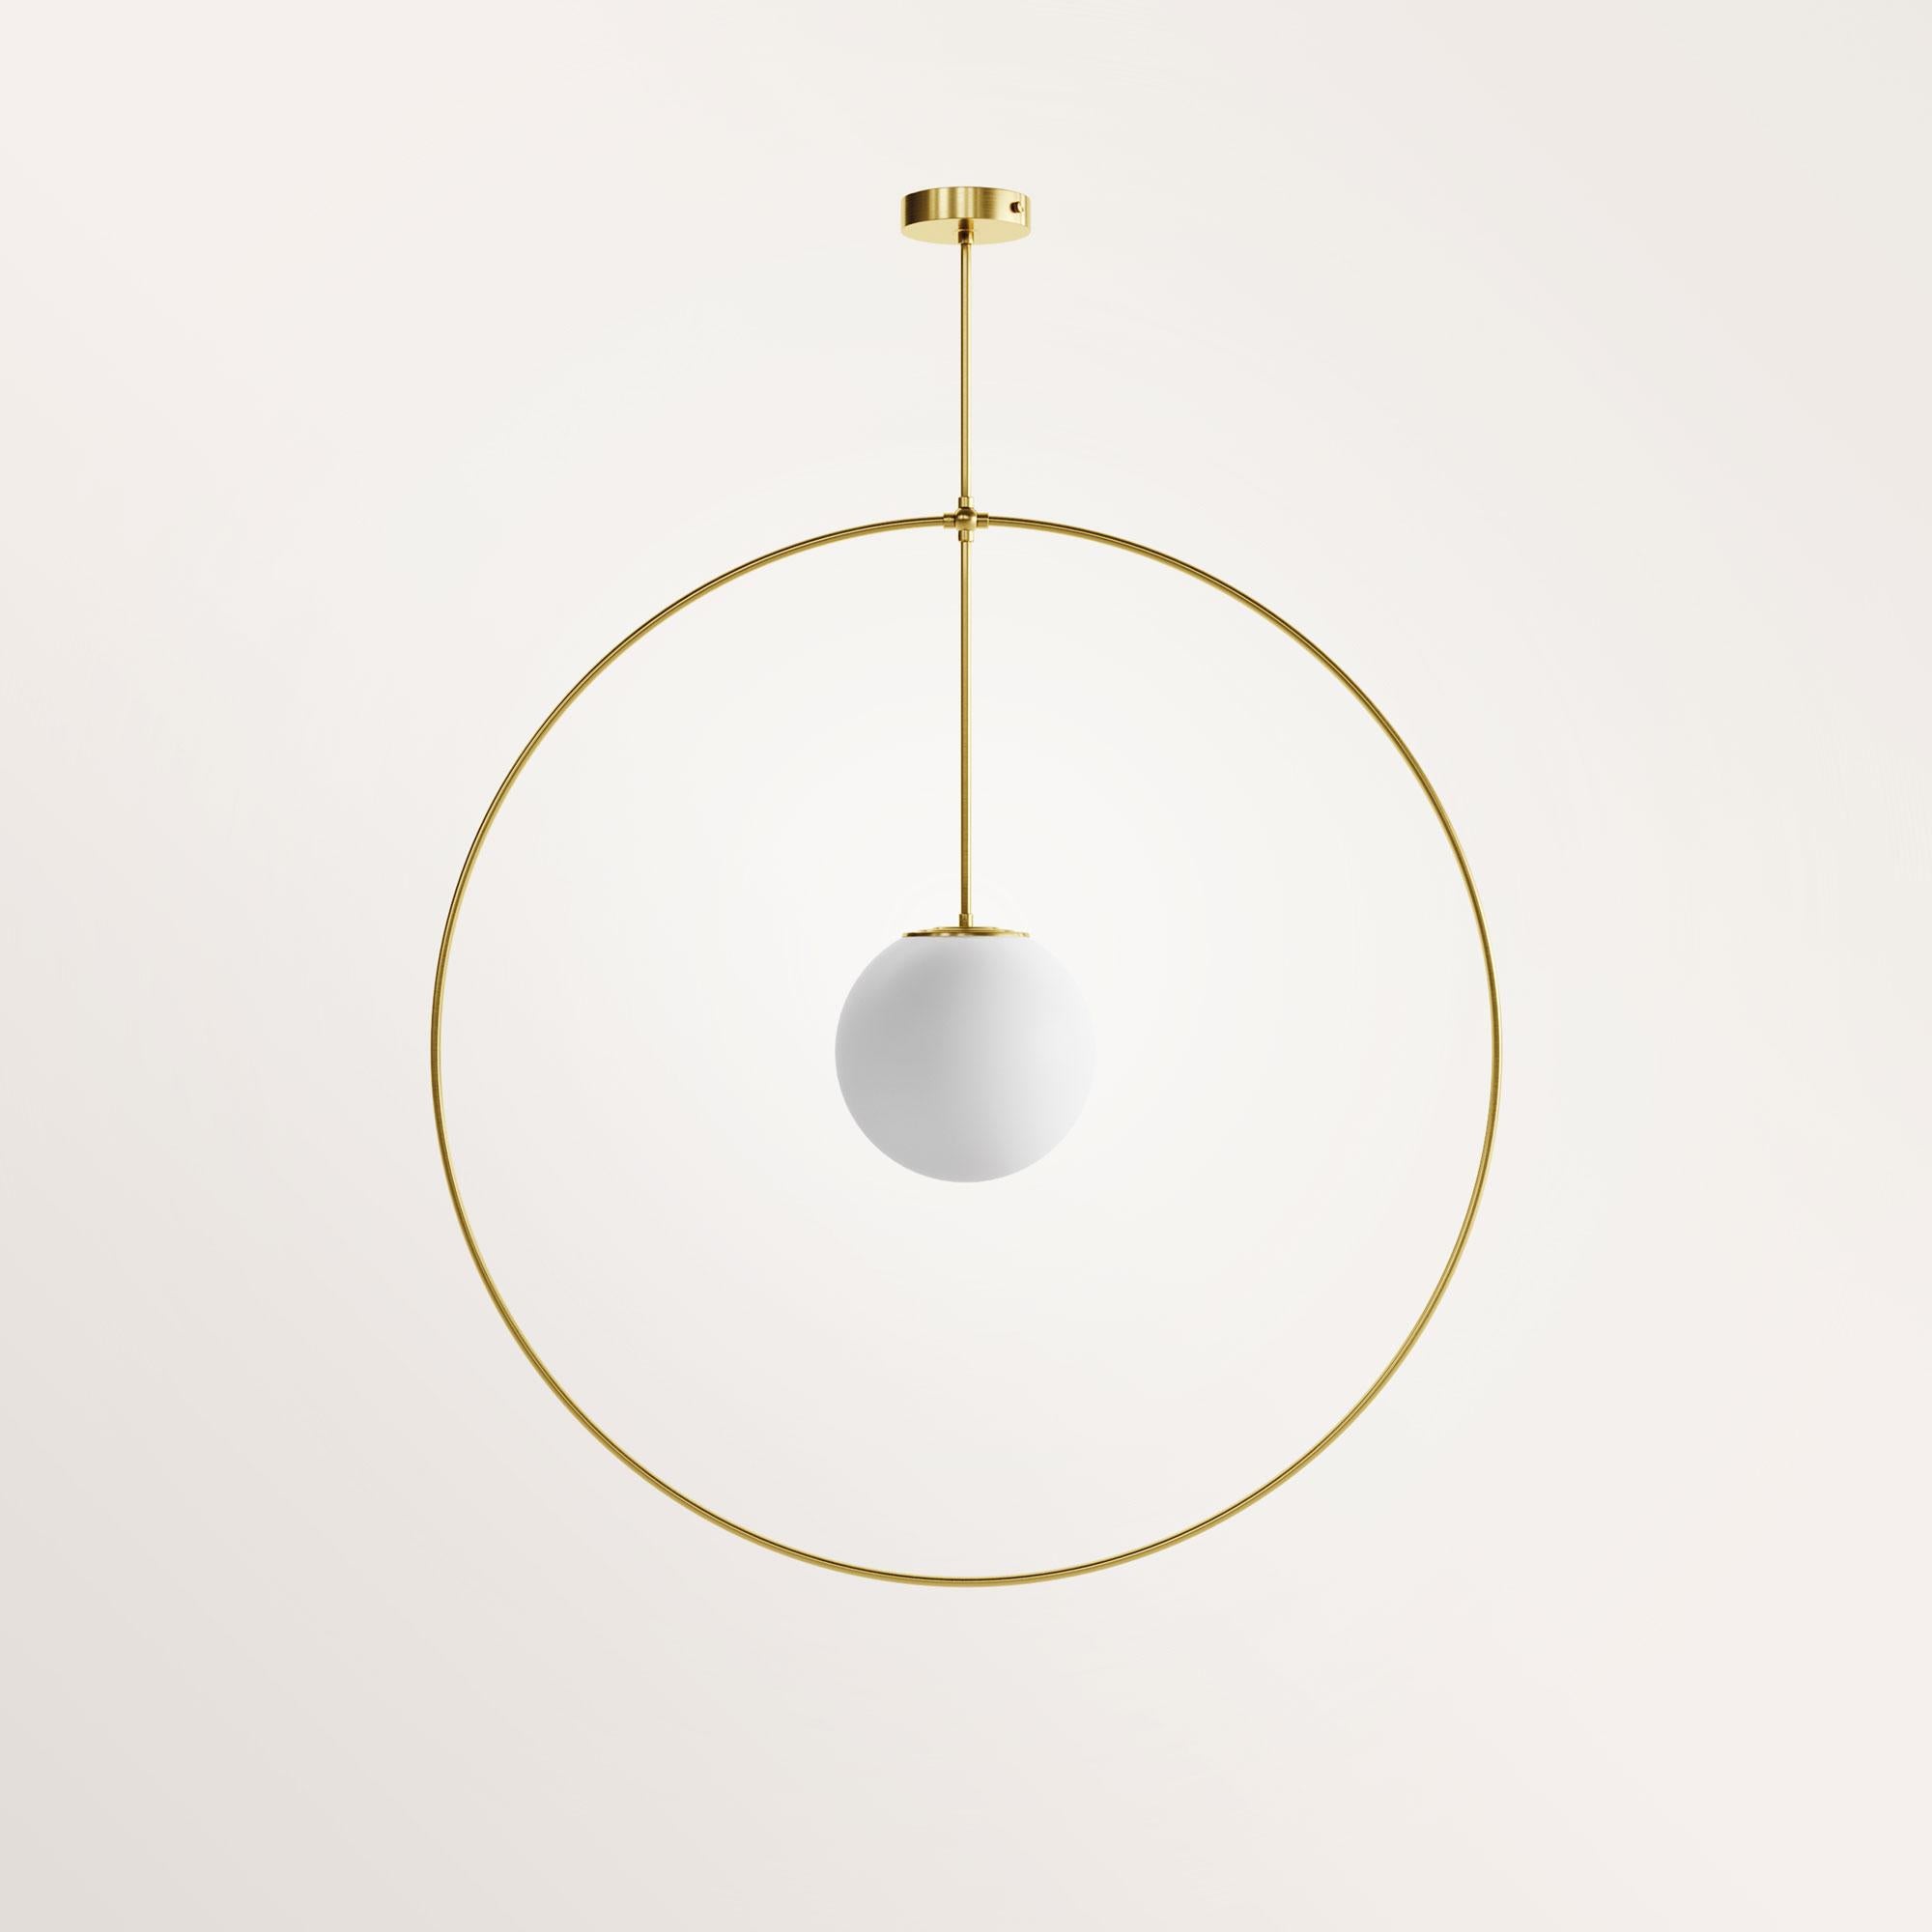 Handmade medium helios chandelier by Gobo Lights
Dimensions: Globe Ø 20 ; Ø 65 ; 100 H 
Materials: Brass, opaline

Goddess with three light heads 

Self-taught and from the world of chemistry, this Belgian craftsman / designer designs his